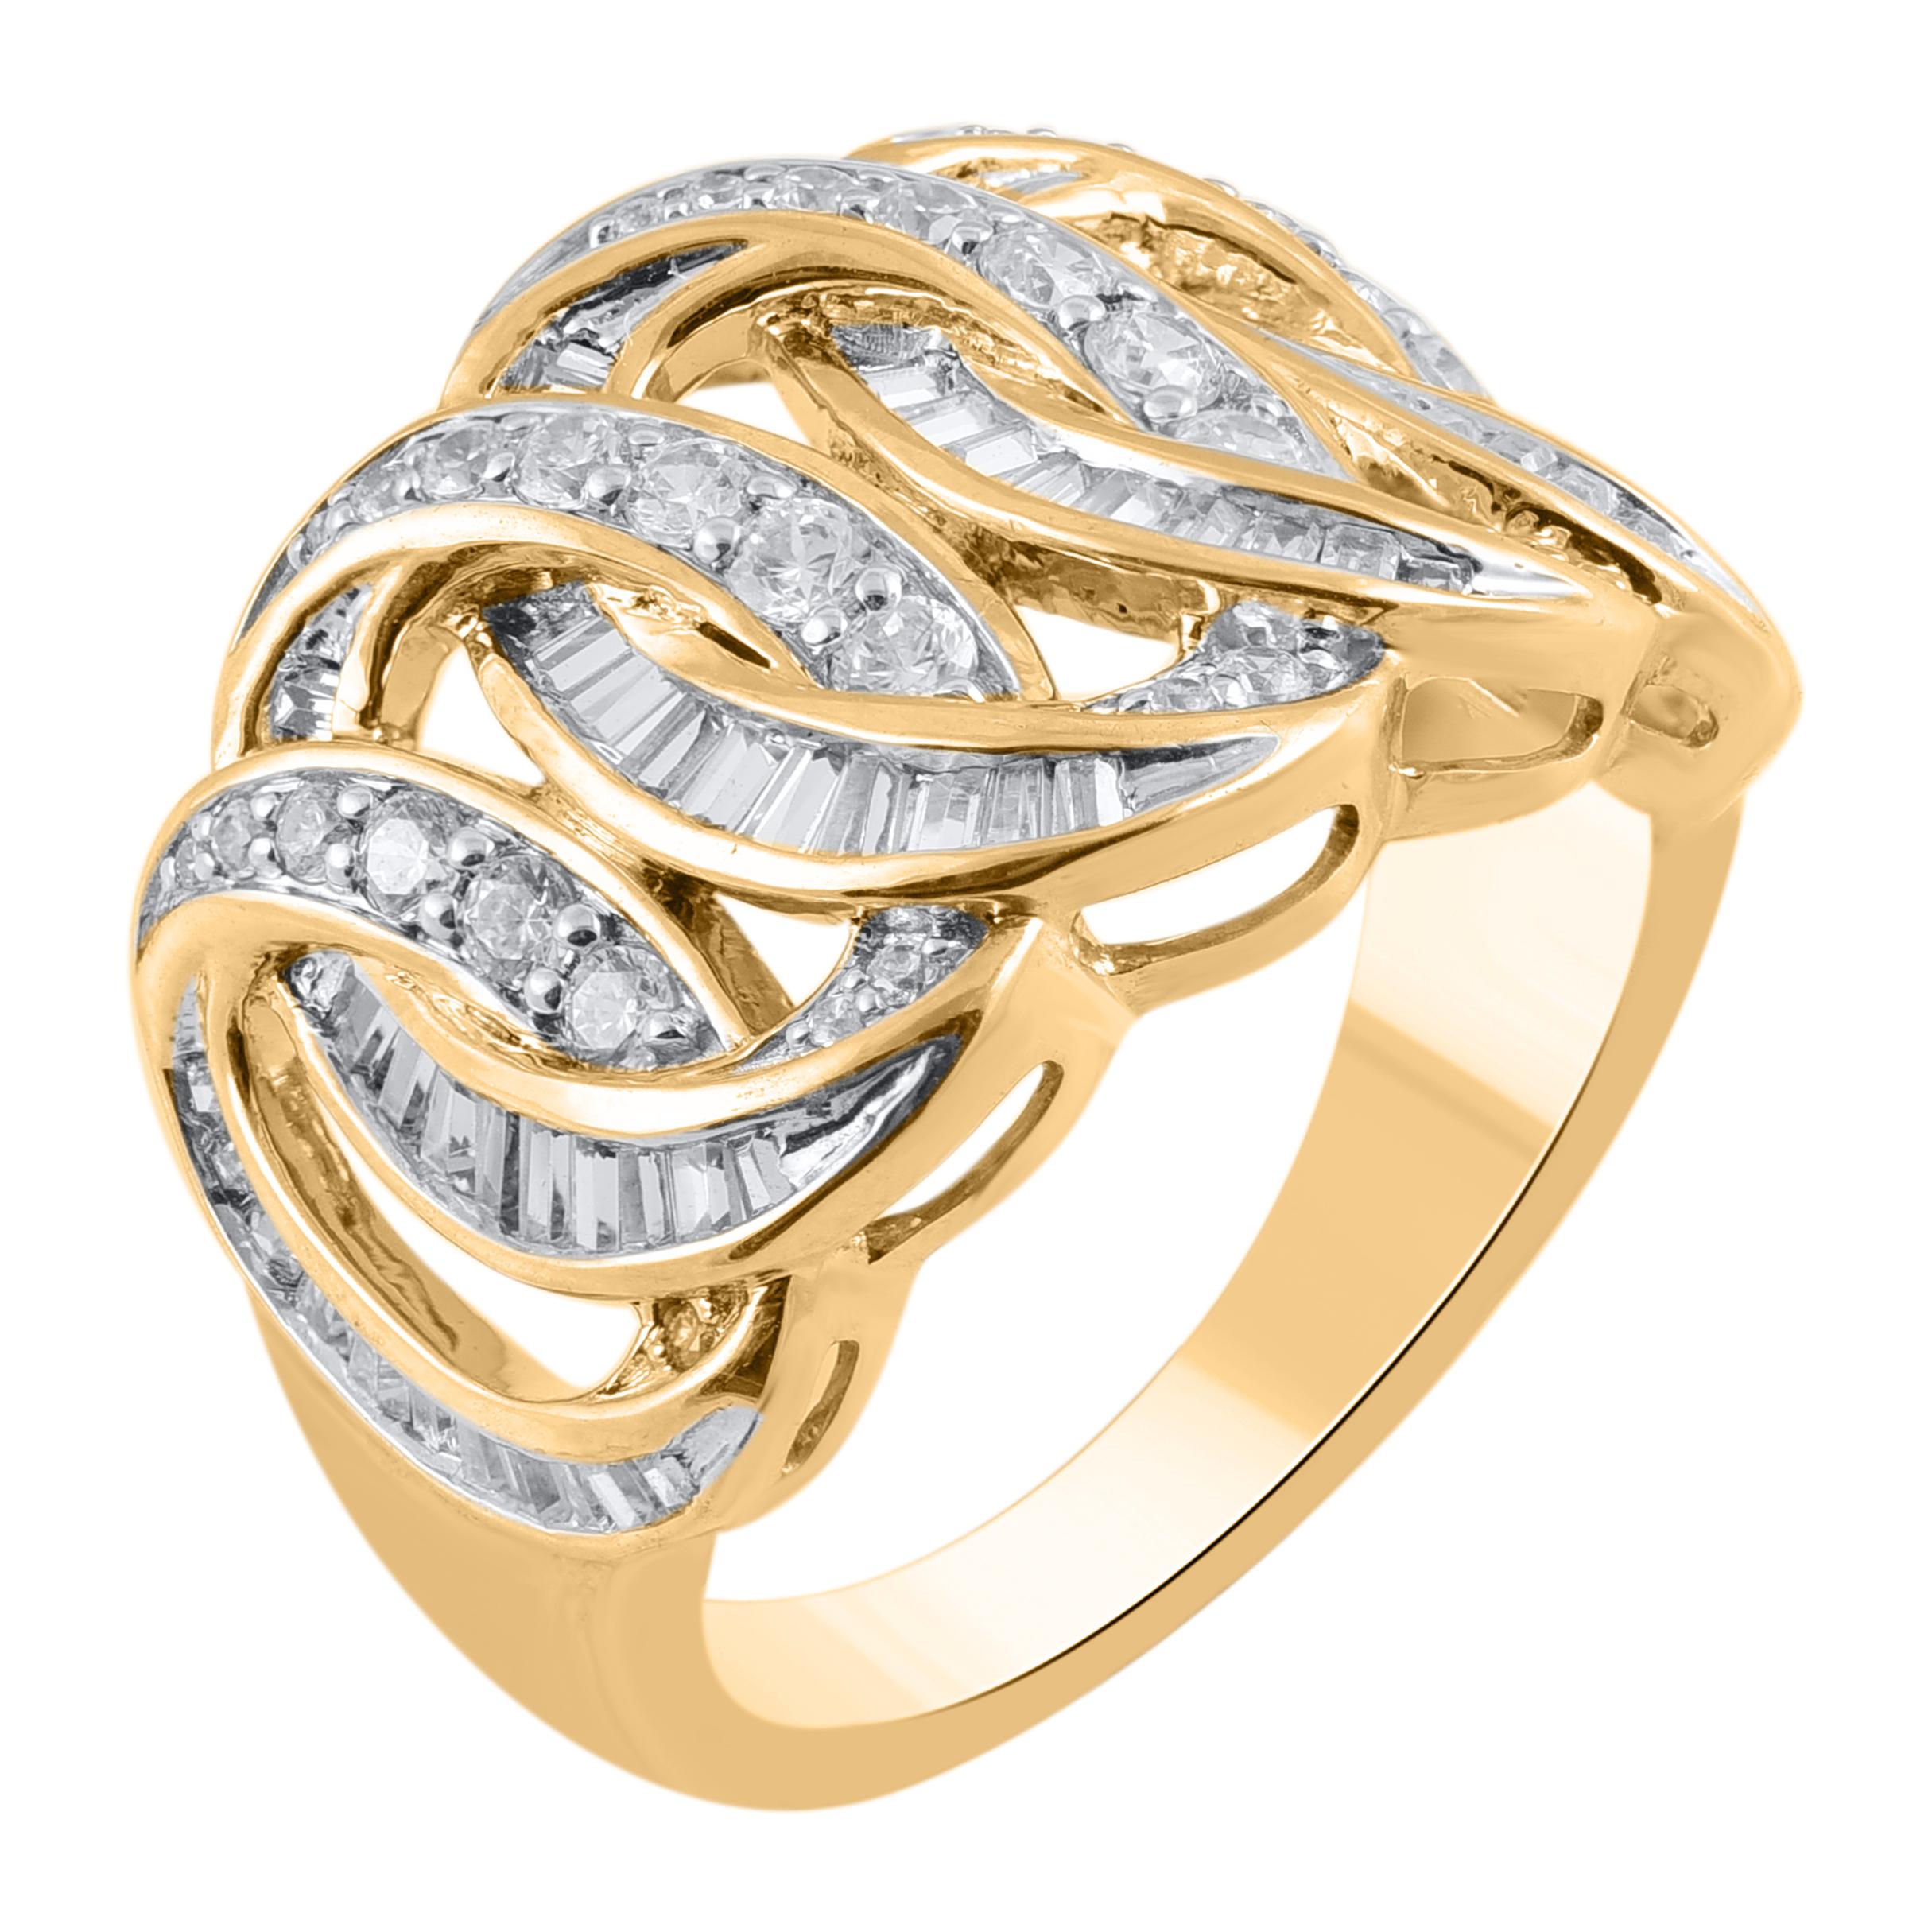 Bring charm to your look with this diamond Interlocking band Ring. This ring is beautifully crafted in 14 Karat yellow gold and embedded with 98 brilliant cut, single cut round diamonds & baguette diamonds in prong and channel setting. Total diamond